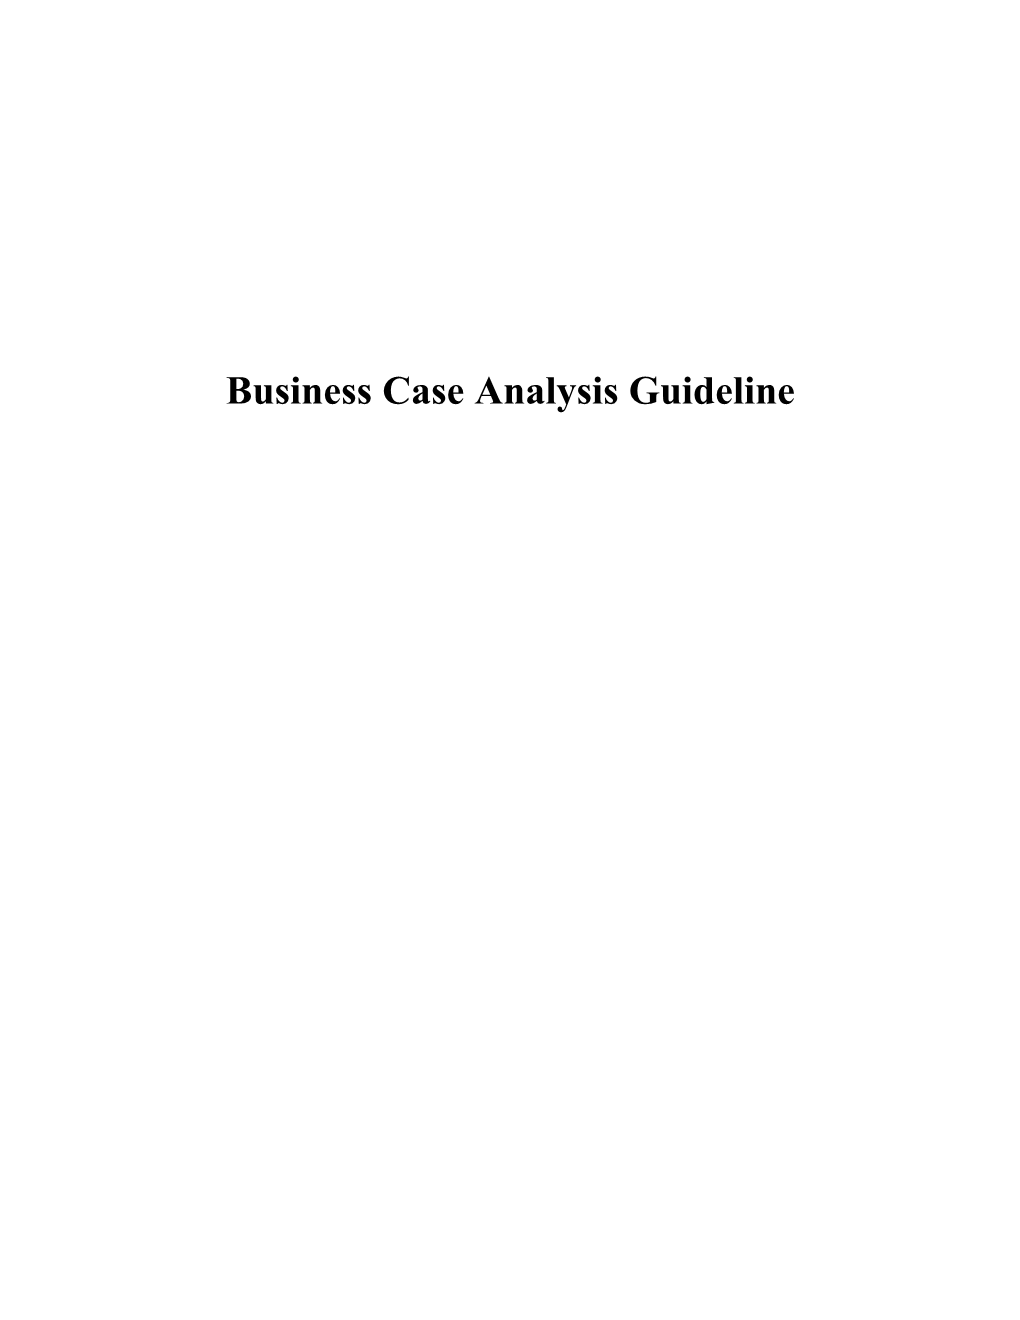 Business Case Analysis Guideline